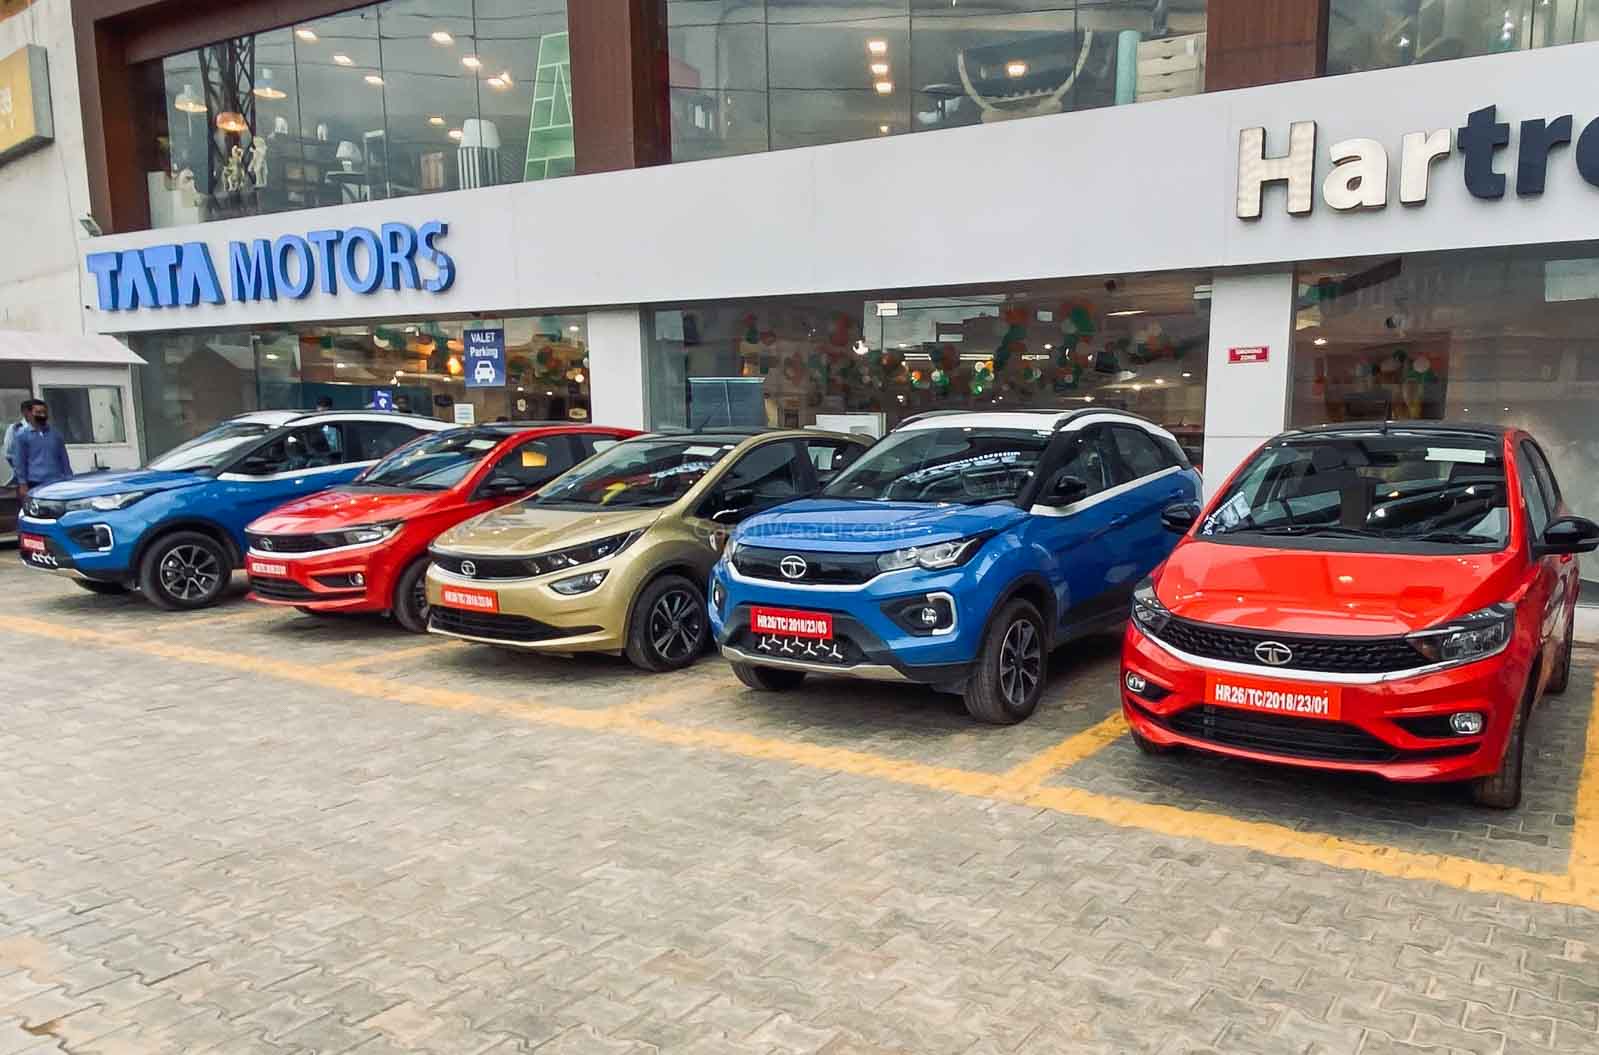 For the various finance schemes, customers can reach out to their nearest Tata Motors dealer or through a Kotak Mahindra Prime branch or visit their website to register their interest in buying a Tata car.